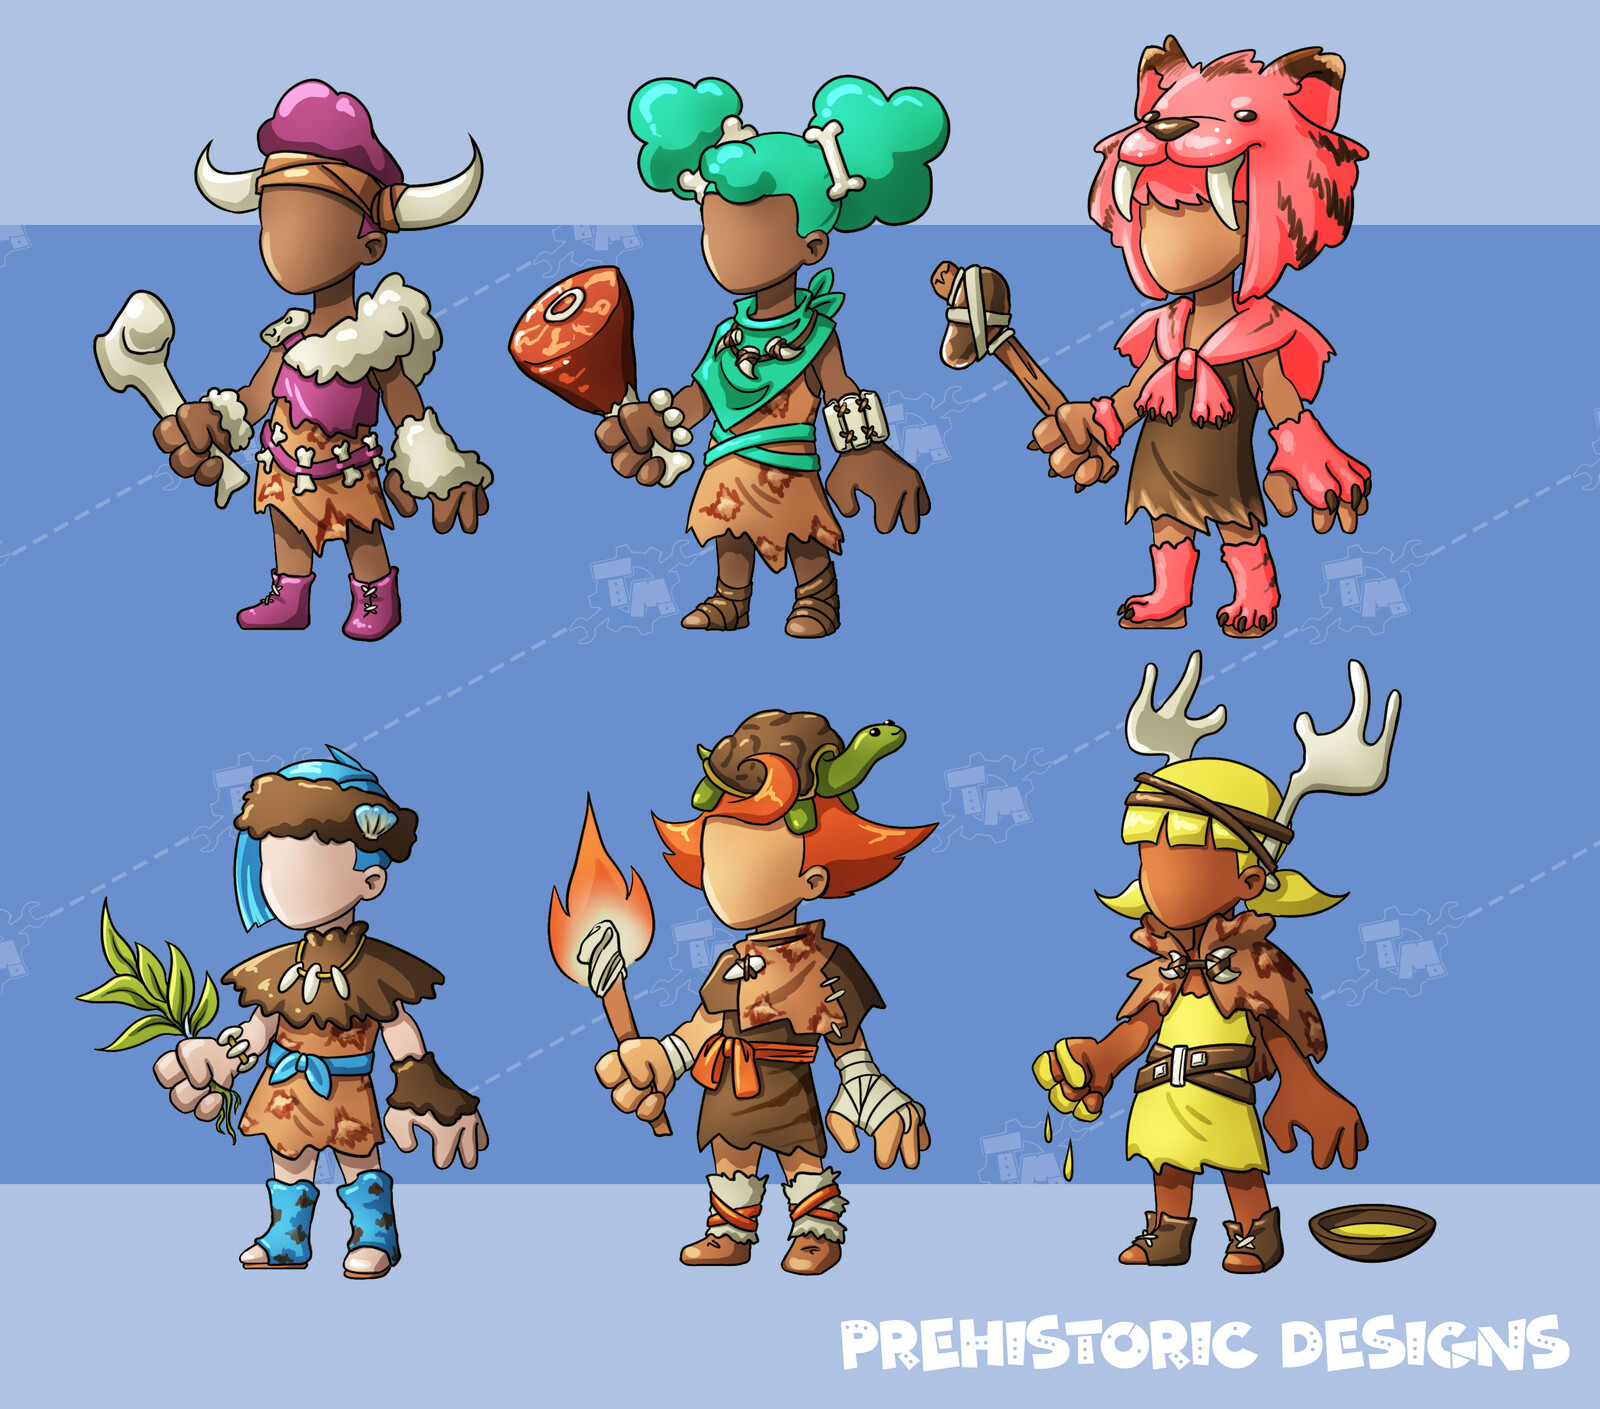 Different outfit options for the players to select along with some tools. These outfits can be interchanged between characters and the accent colors change accordingly. 